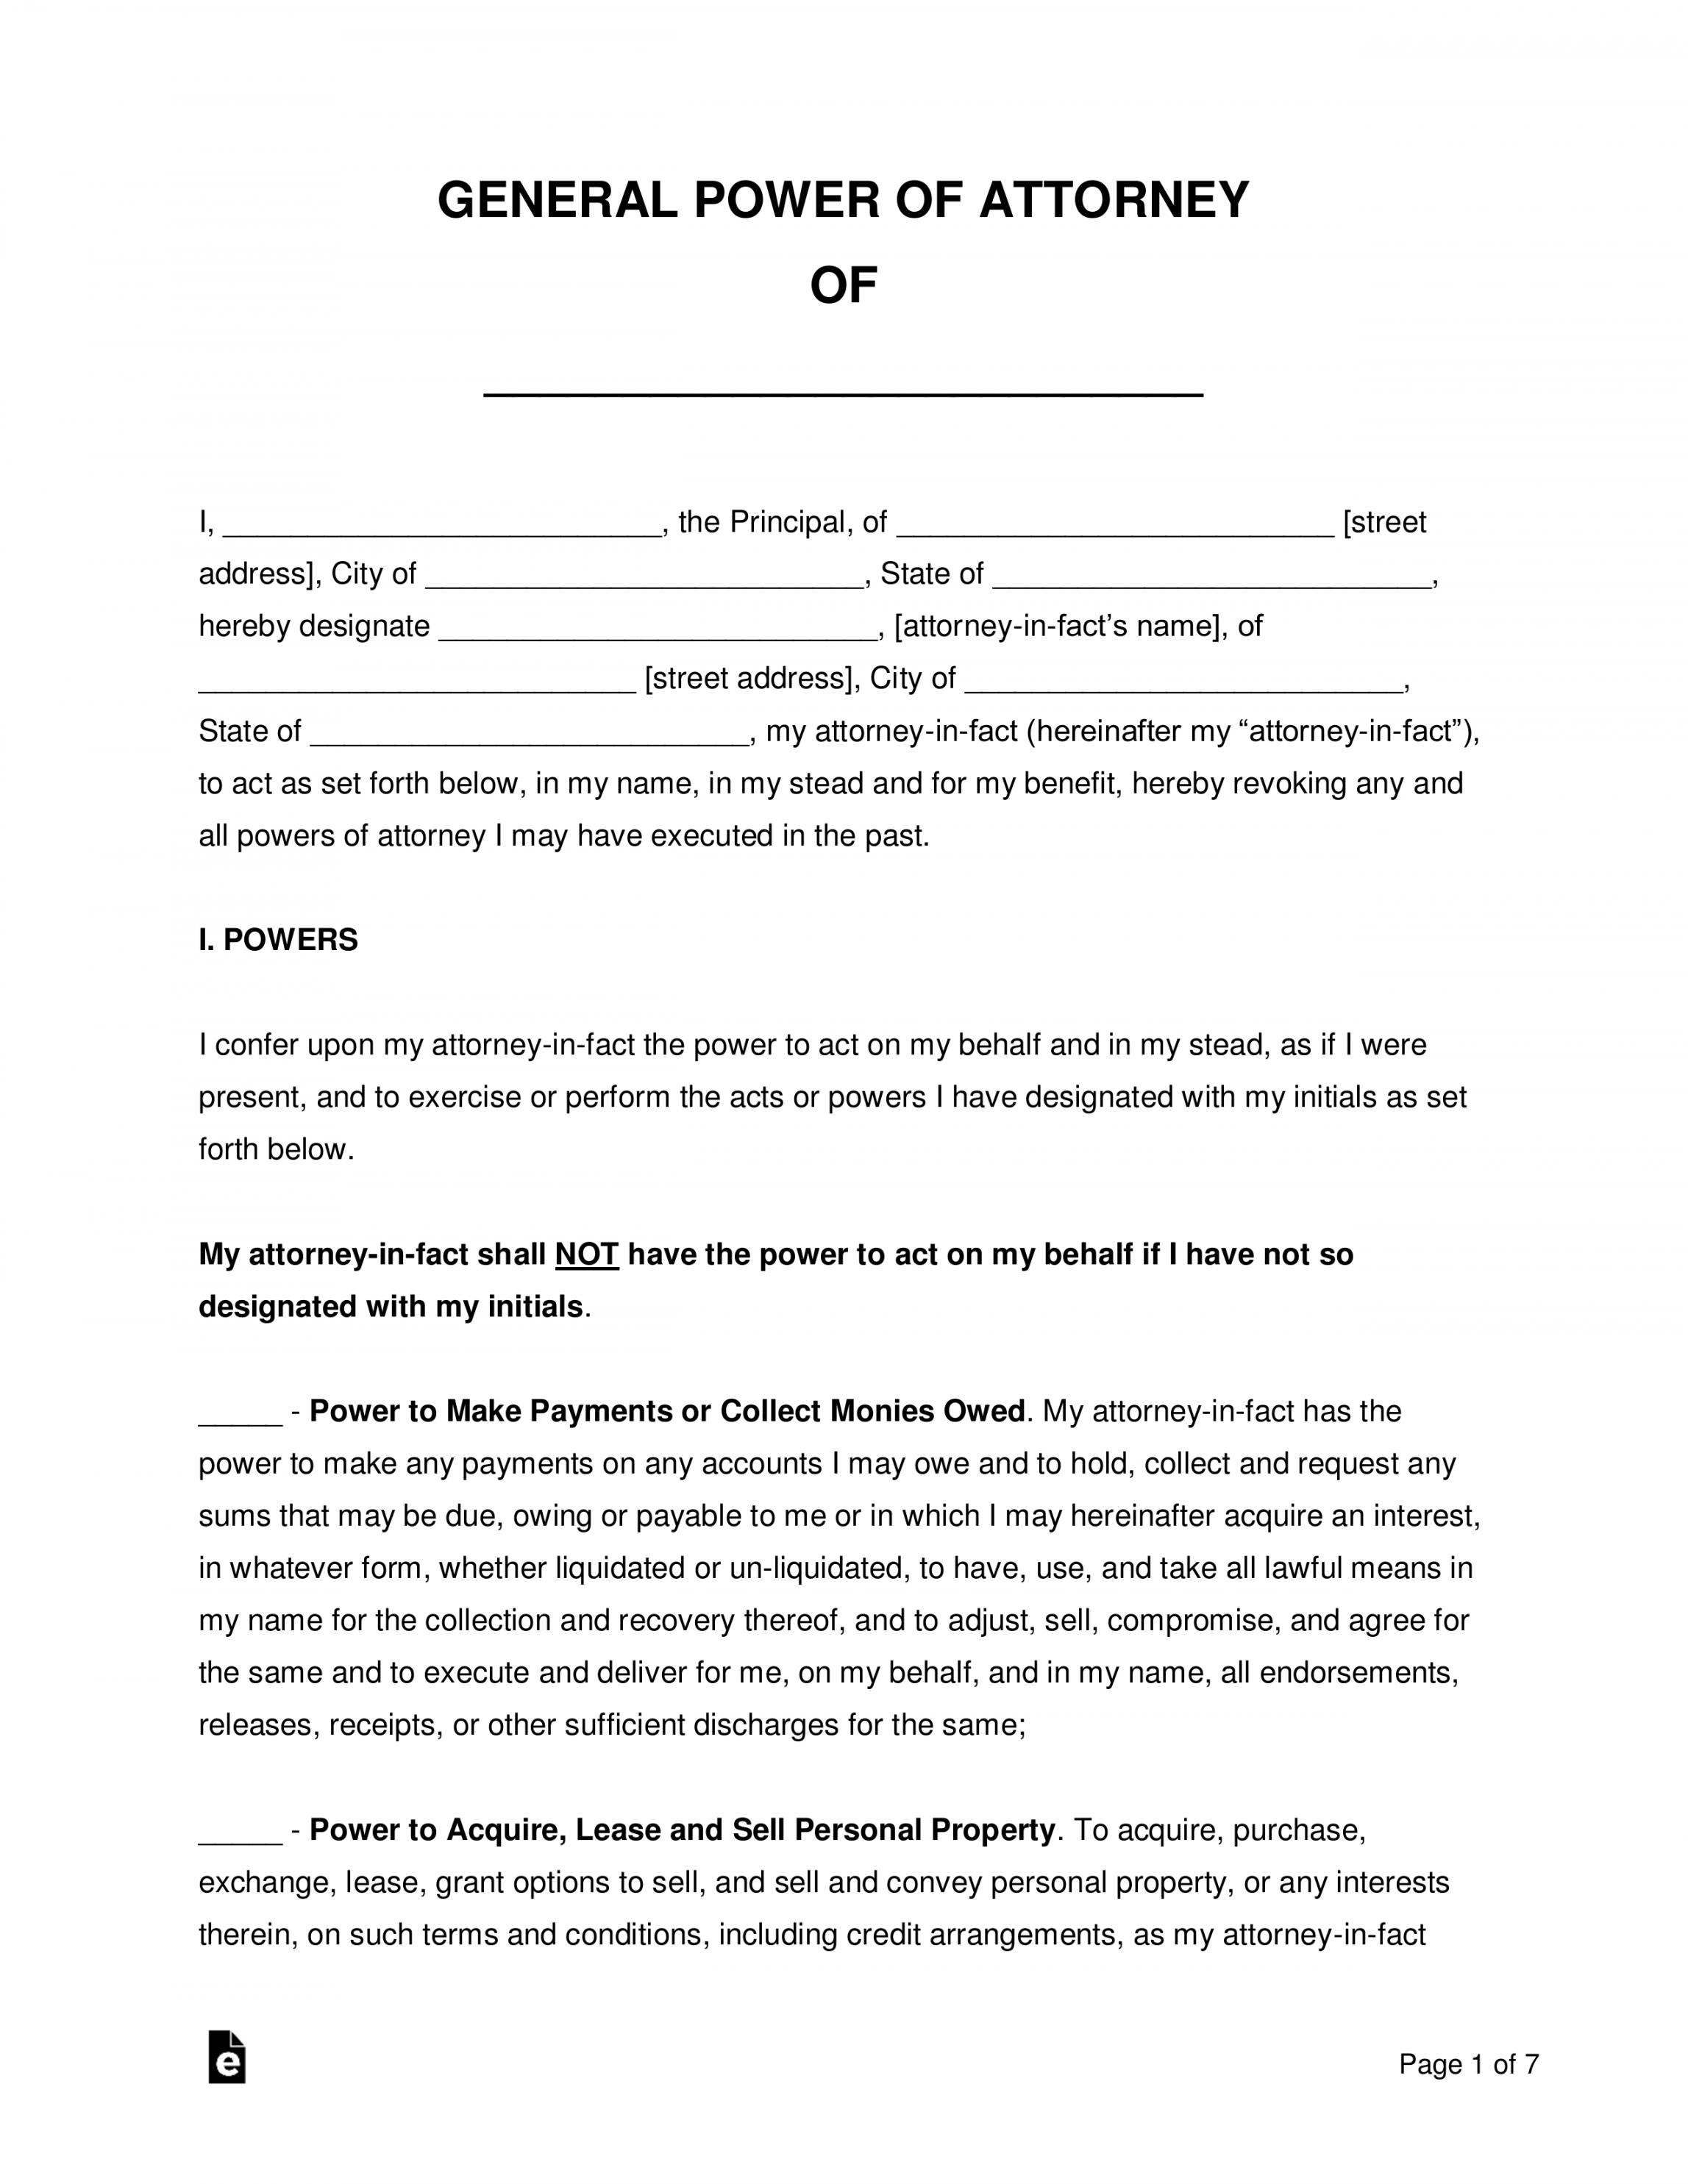 Free Printable Power of Attorney - Printable - Free General (Financial) Power of Attorney Form  Non-Durable